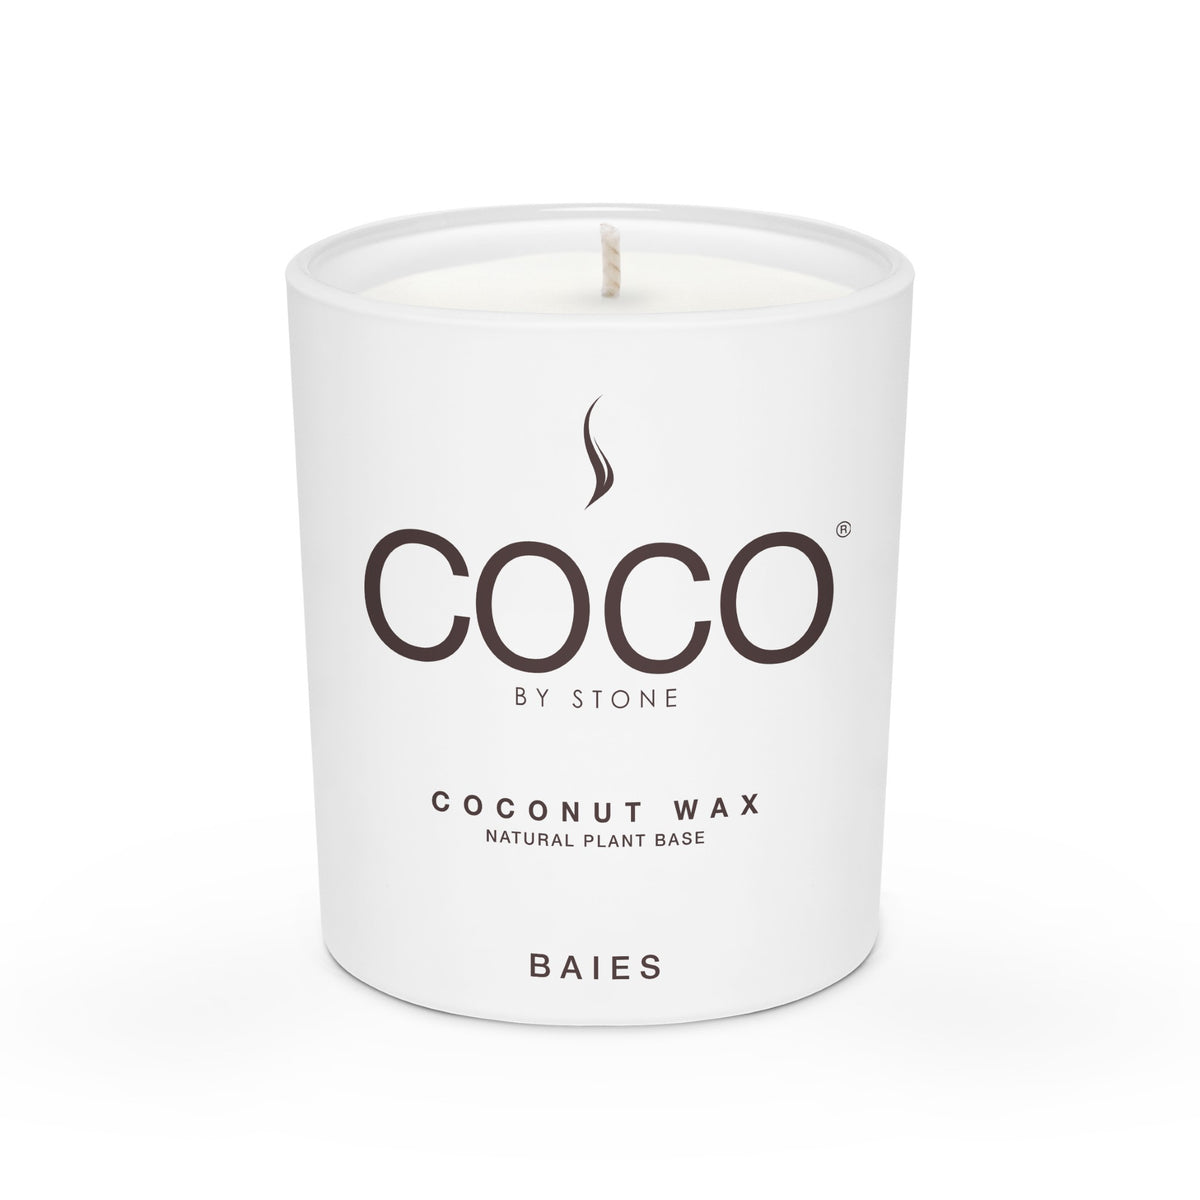 Coco by Stone Baies Coconut Wax Candle (2.5 oz)